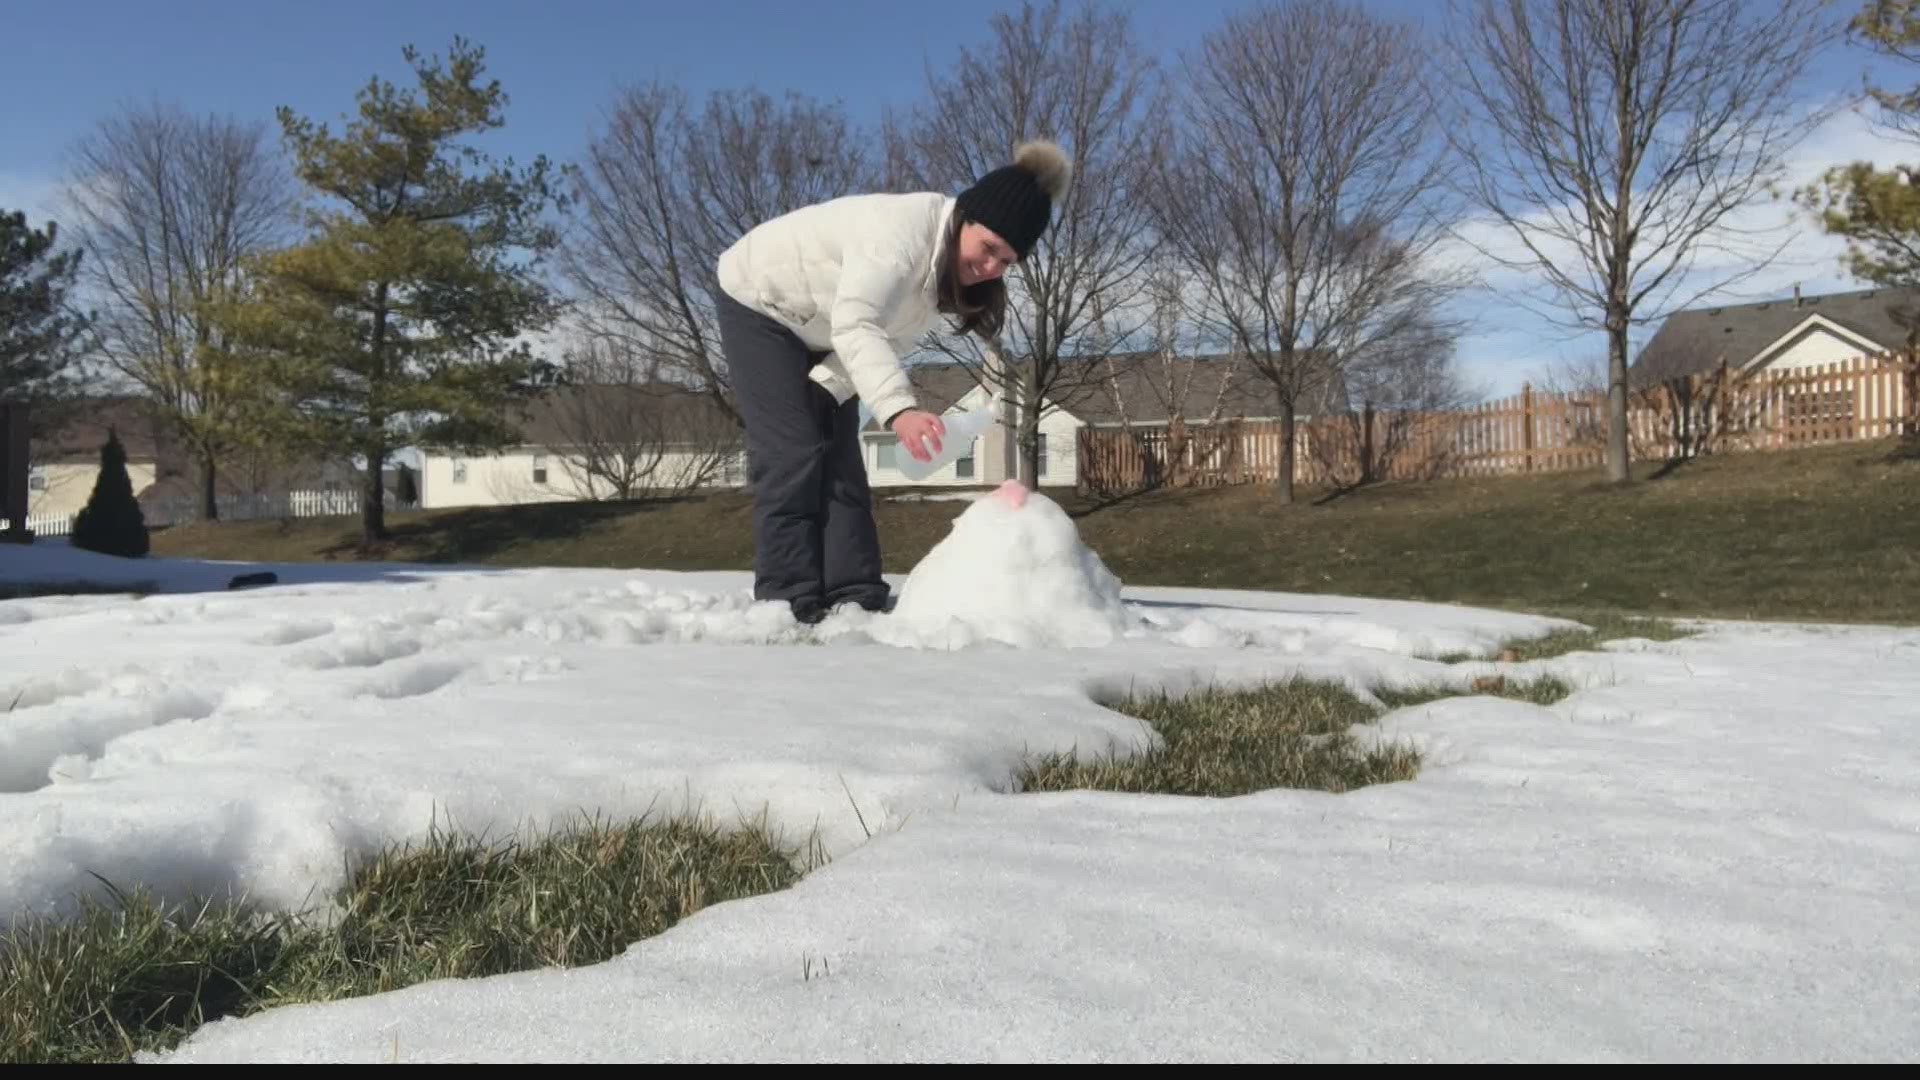 13News meteorologist Kelly Greene shares unique, fun activities to do in the snow.